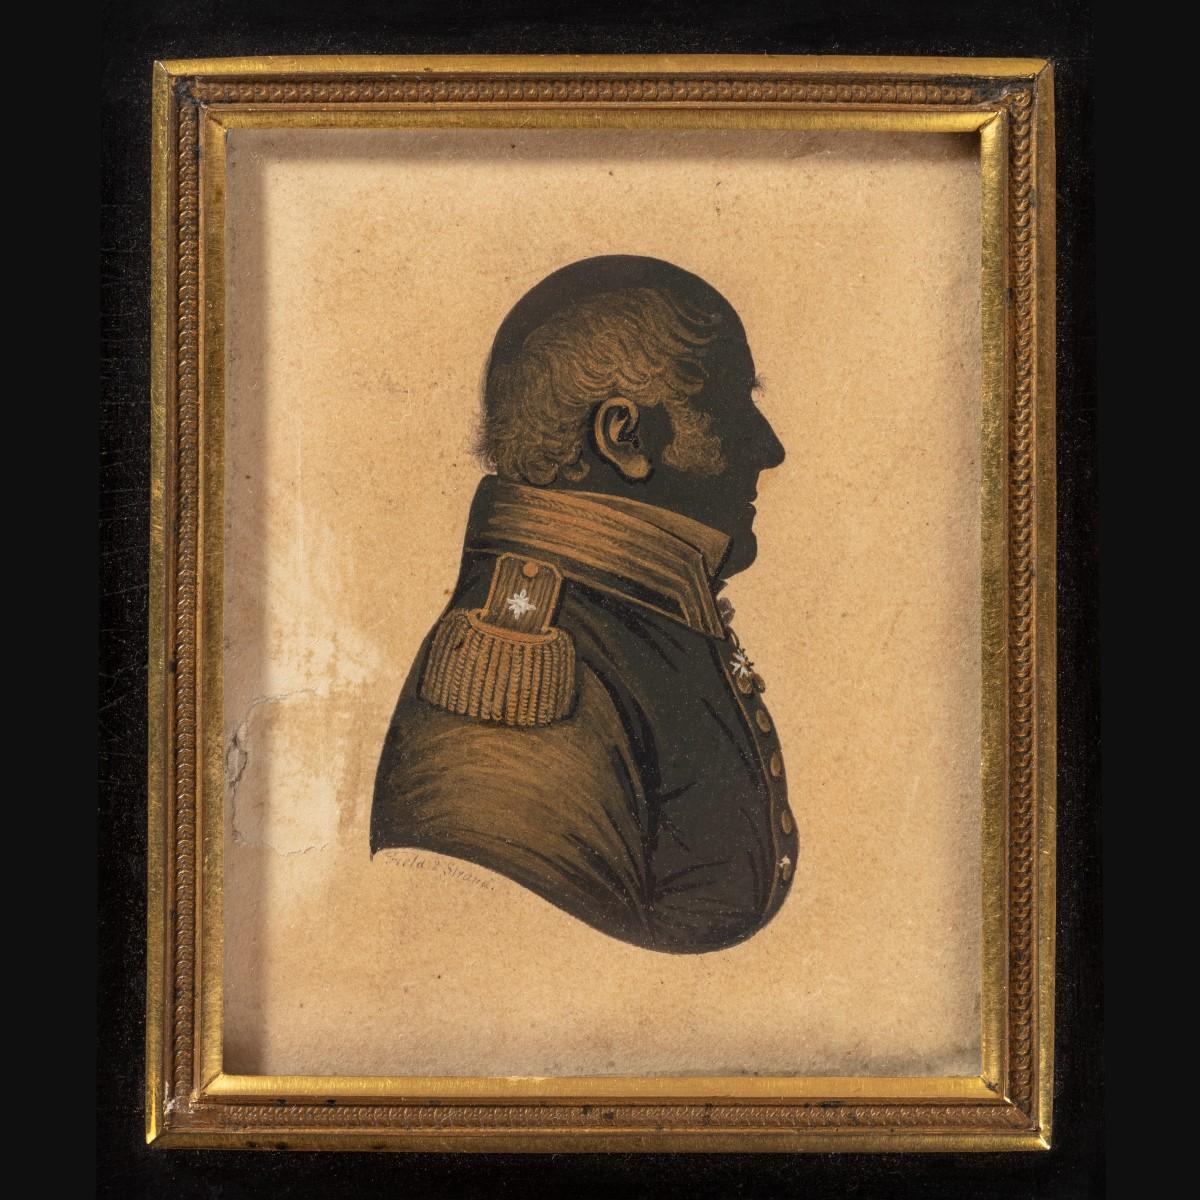 This silhouette shows Admiral Sir Thomas Hardy in dress uniform and facing to the left. The reverse is inscribed incursive handwriting ‘Ad. Sir T Hardy K.C.B. Gov. G H. J Field Profilist to their Majesties, 2 Strand, London.’

English, circa